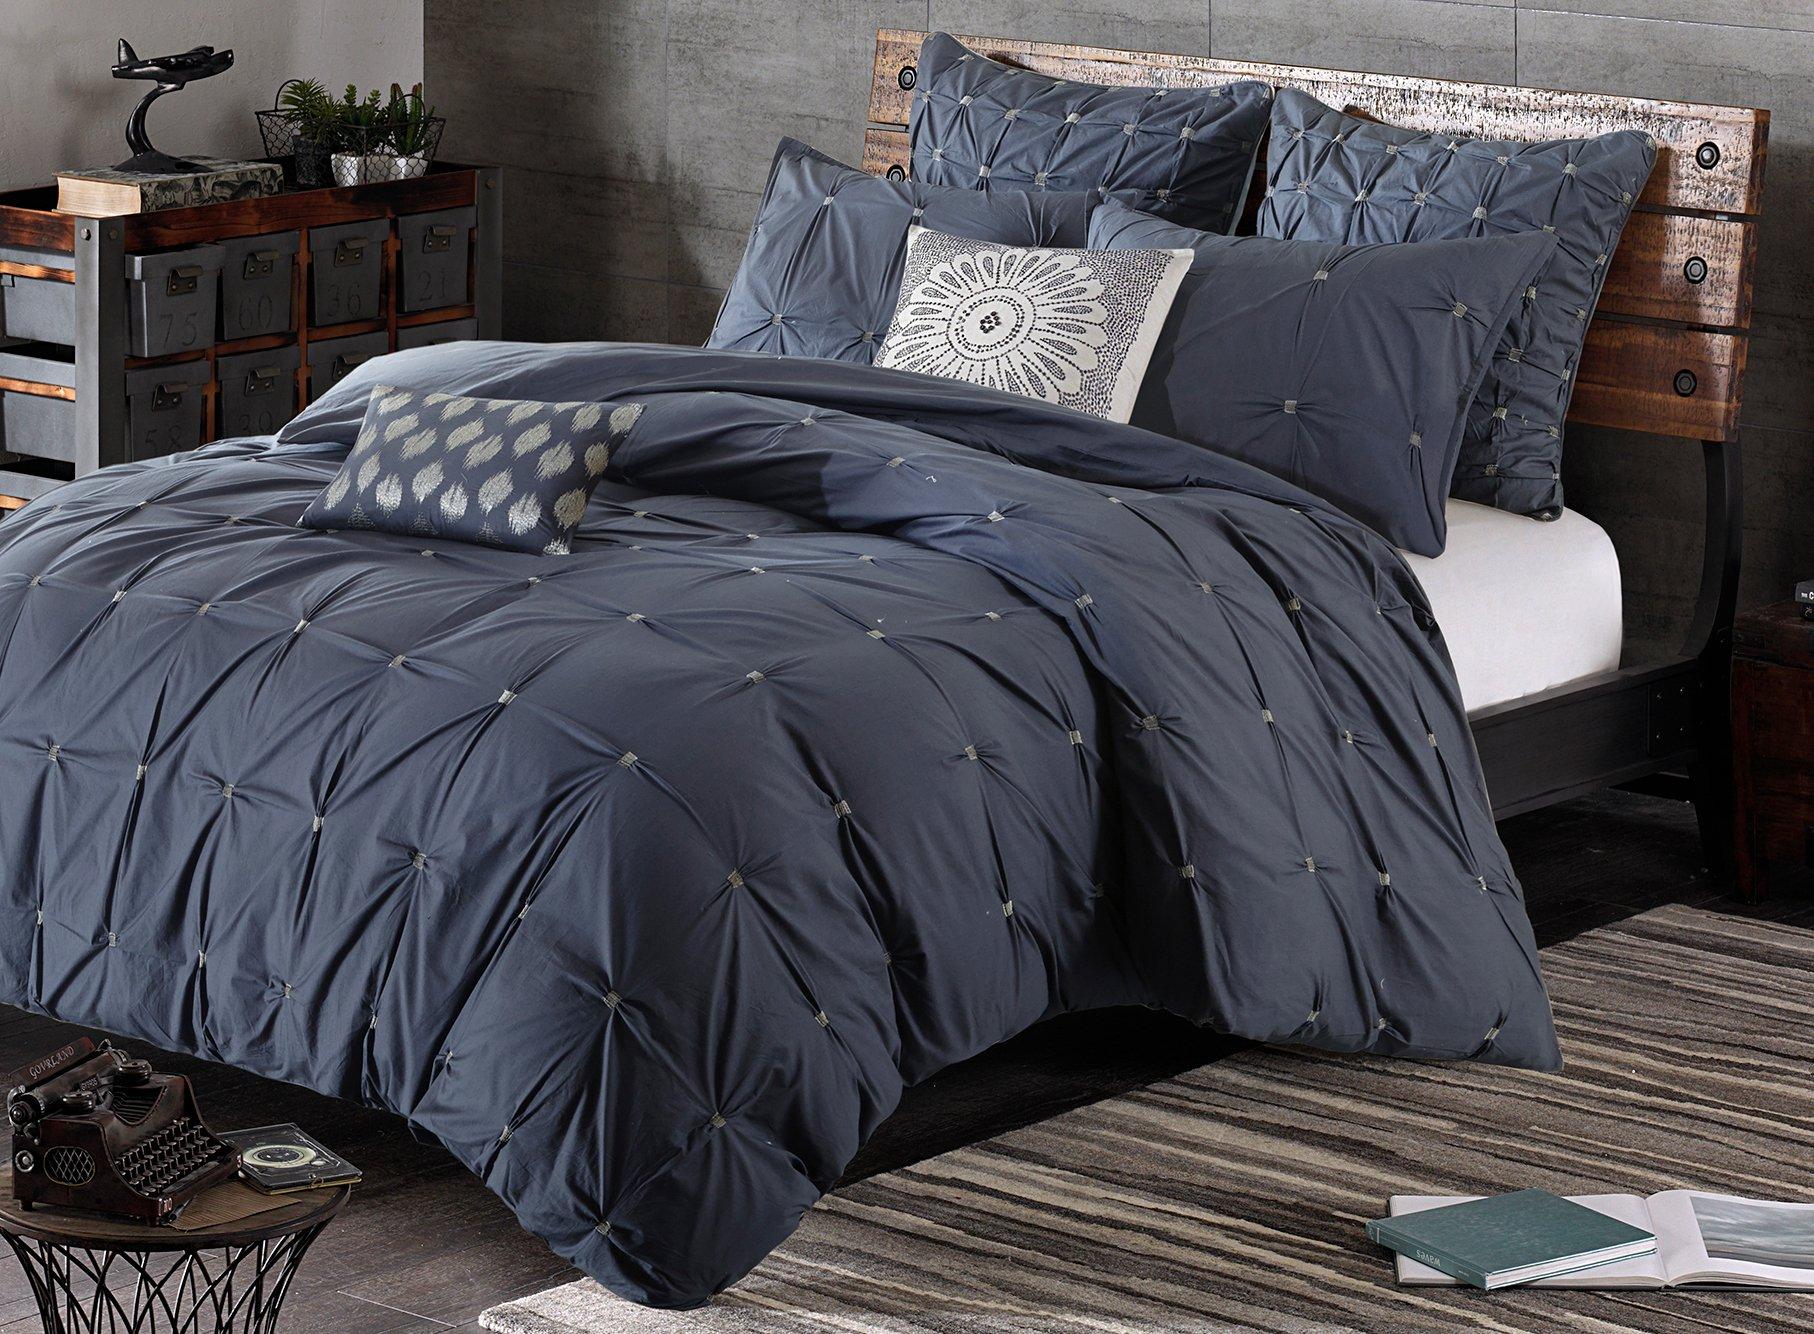 Ink & Ivy Maisie Embroidered Duvet Cover Set